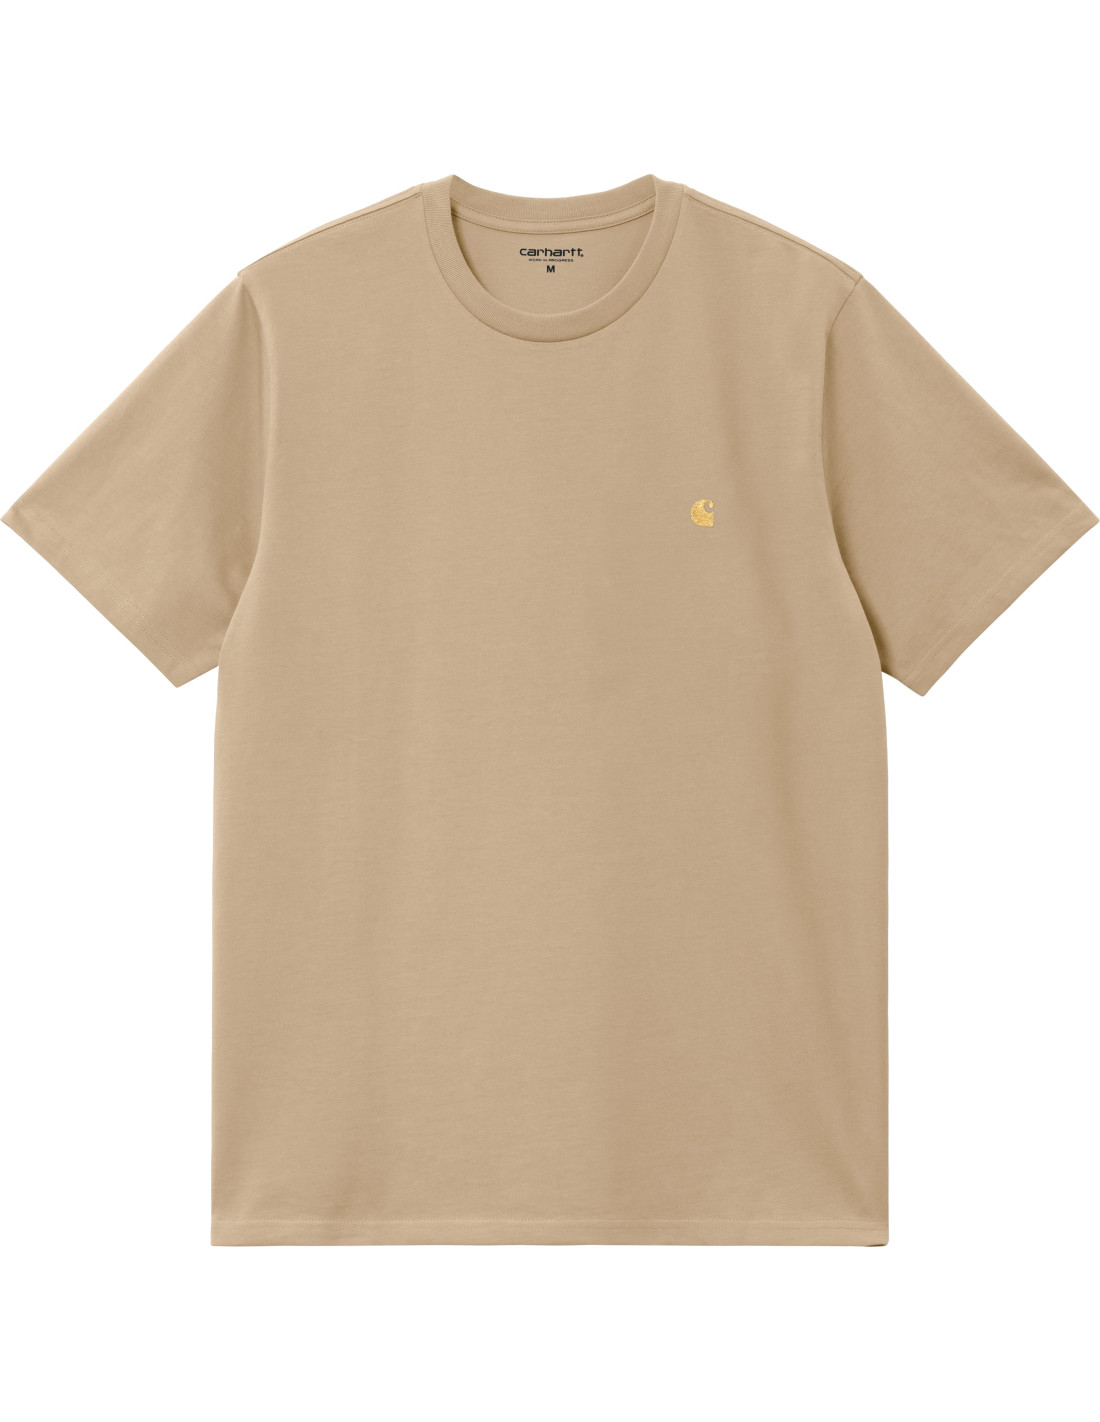 S S CHASE T-SHIRT